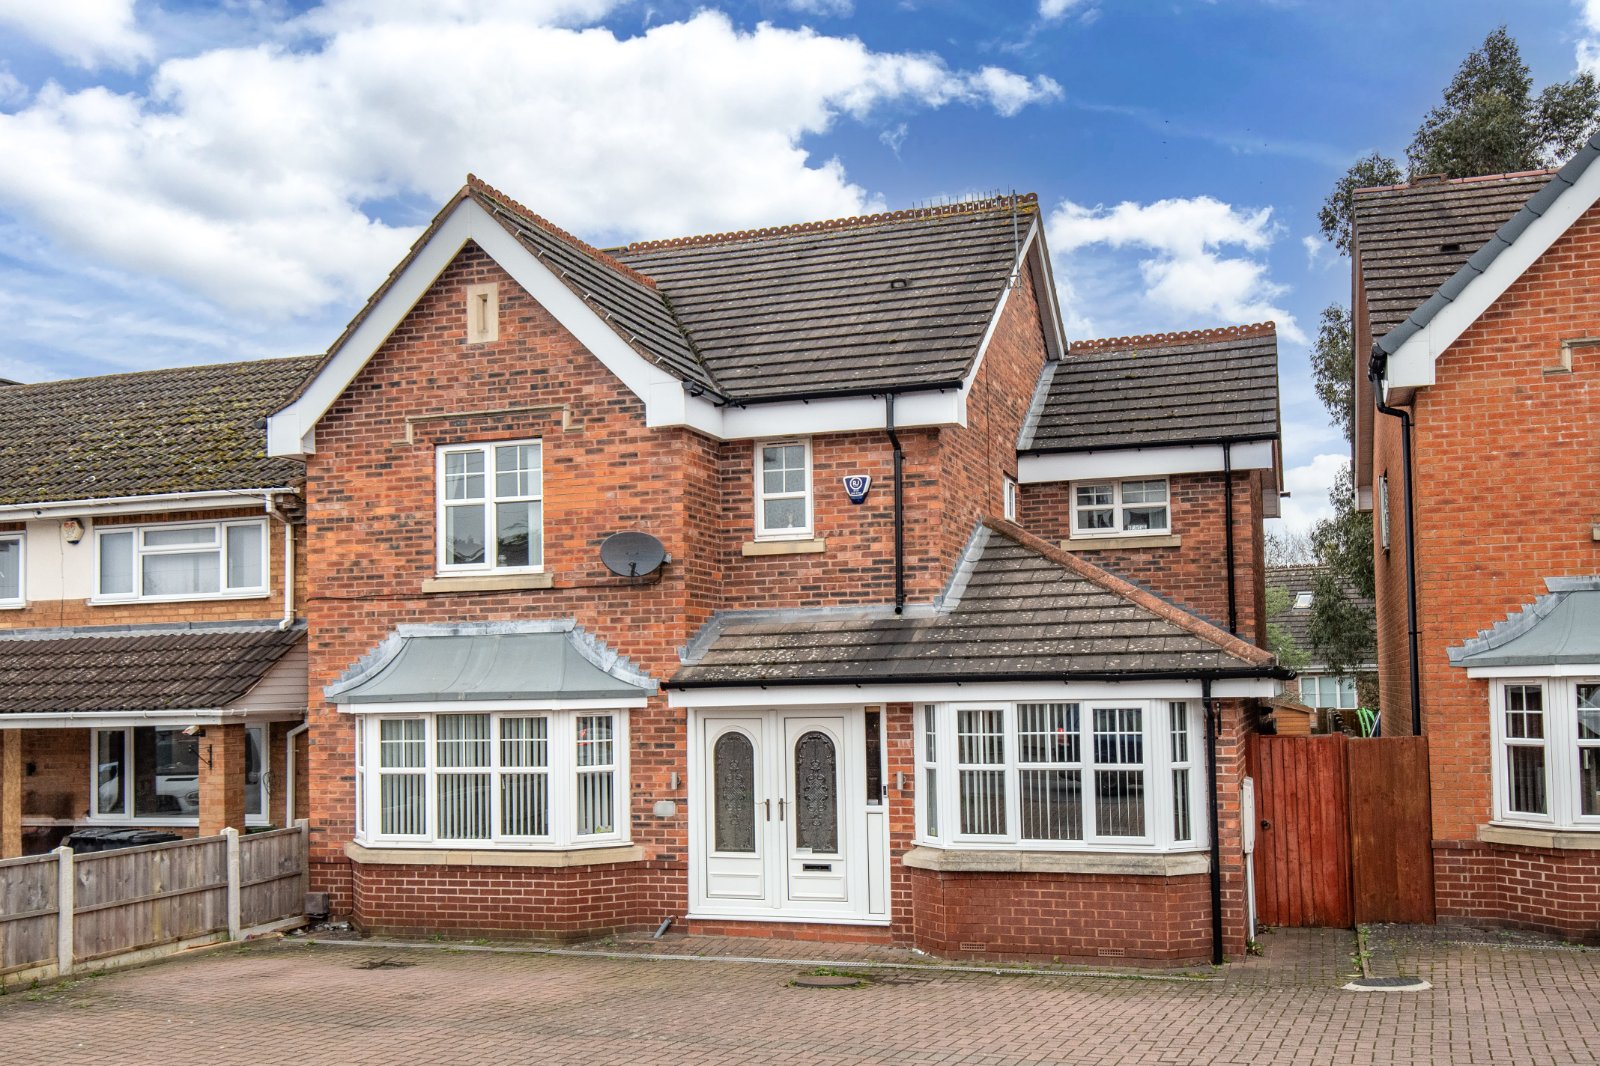 4 bed house for sale in Golden Cross Lane, Catshill  - Property Image 1